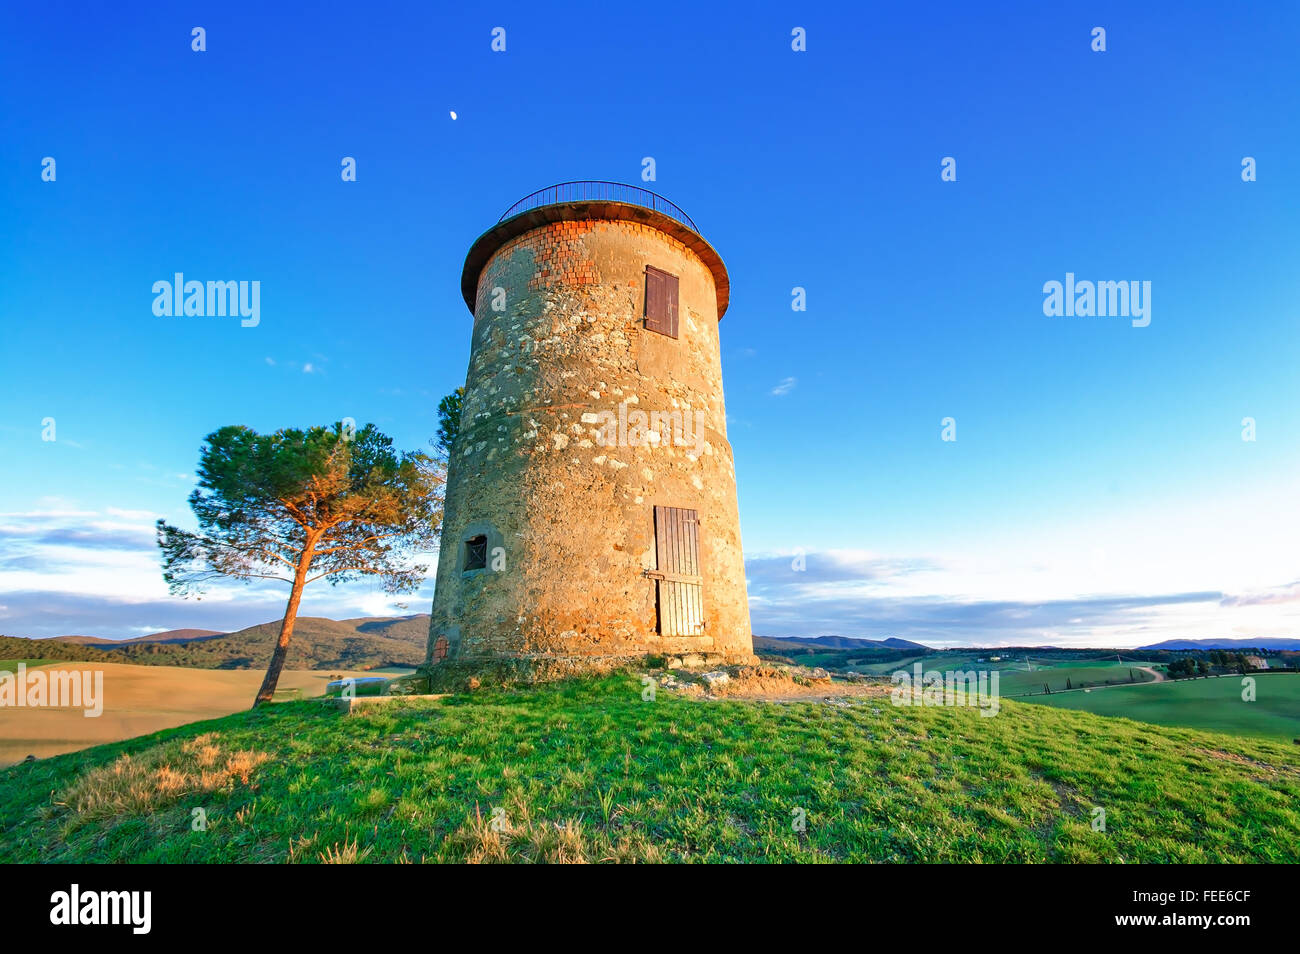 Tuscany, Maremma typical countryside sunset twilight landscape with hills, tree and rural tower. Stock Photo